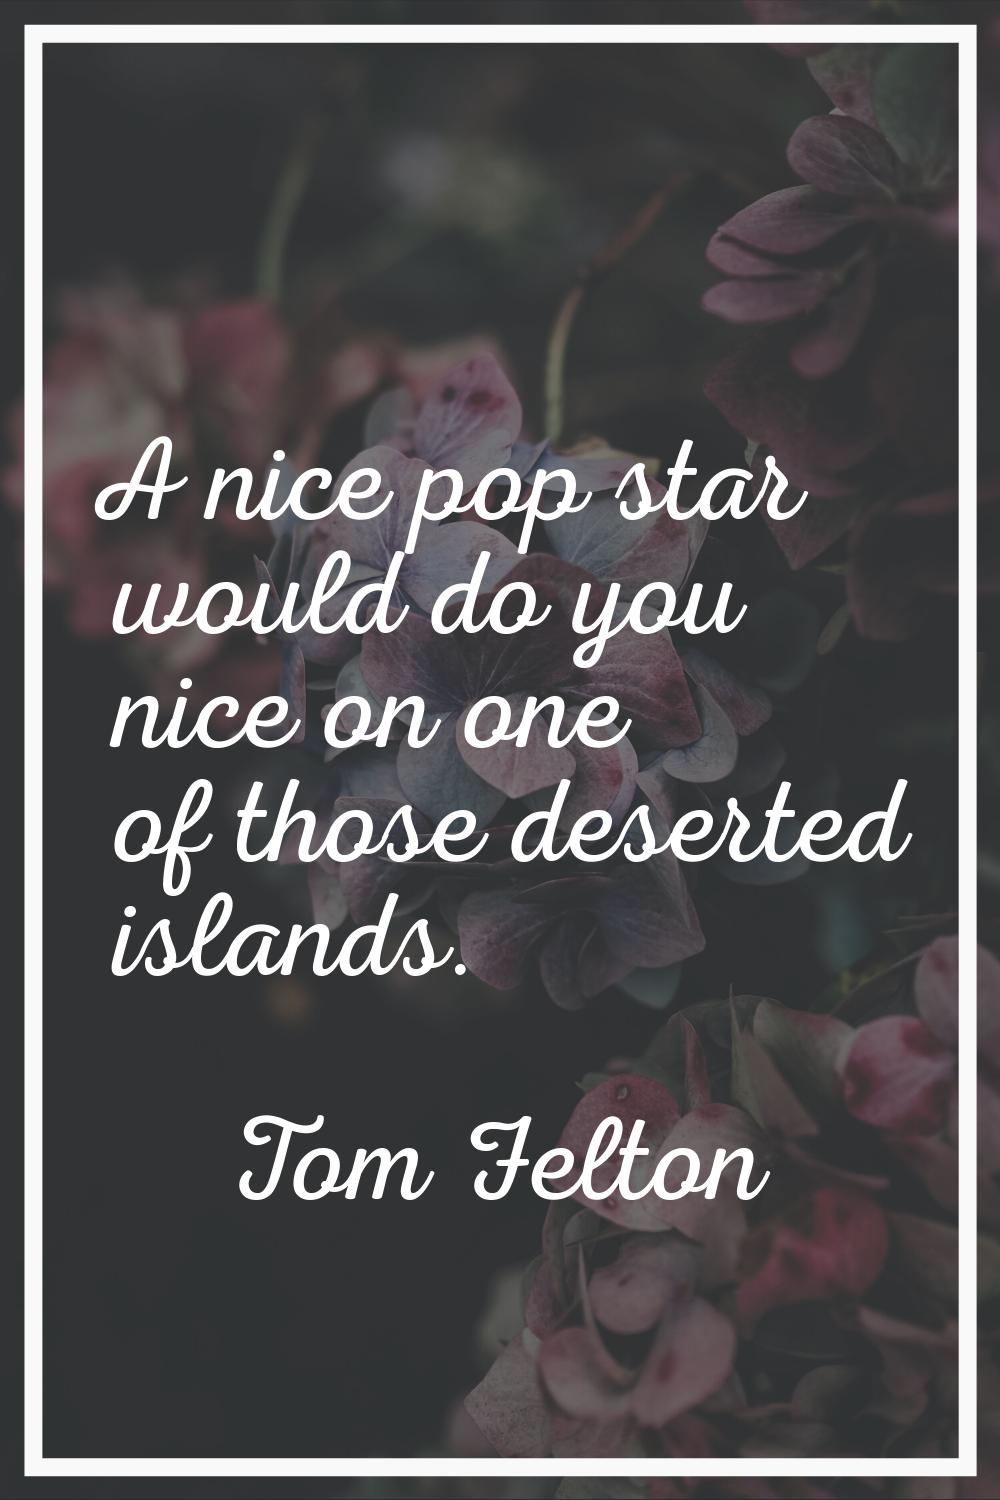 A nice pop star would do you nice on one of those deserted islands.